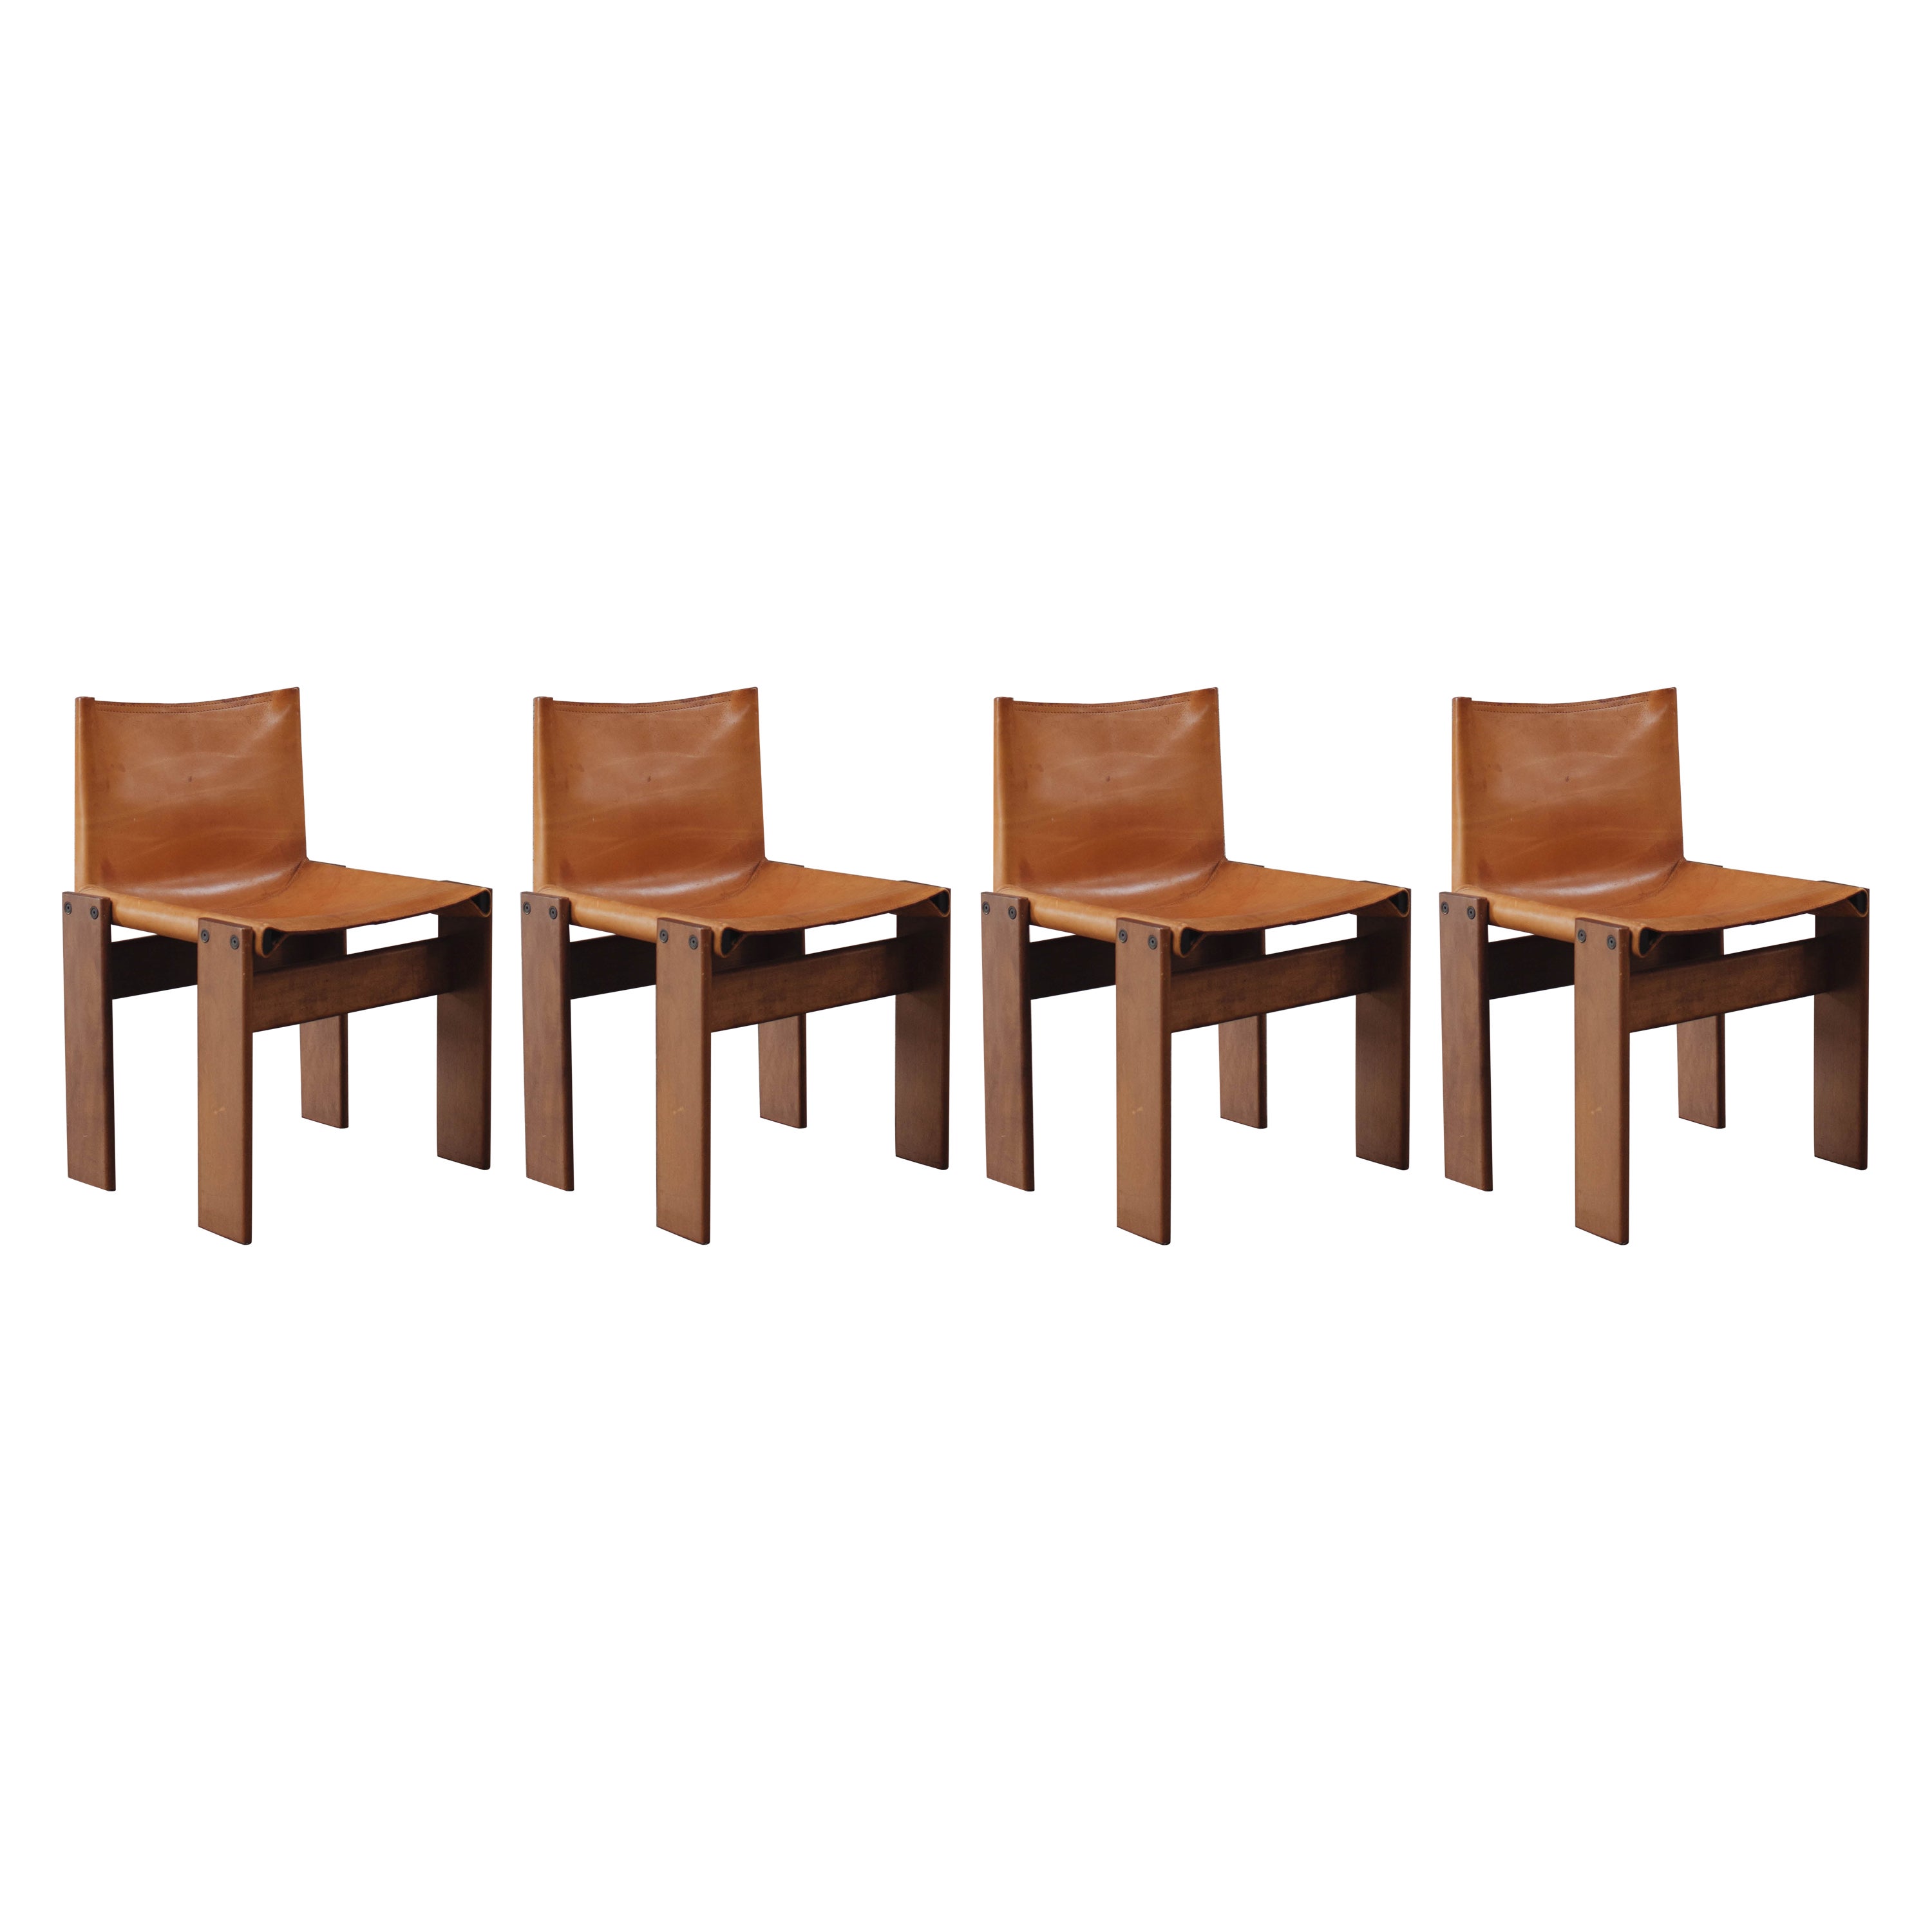 Afra & Tobia Scarpa "Monk" Dining Chairs for Molteni, 1974, Set of 4